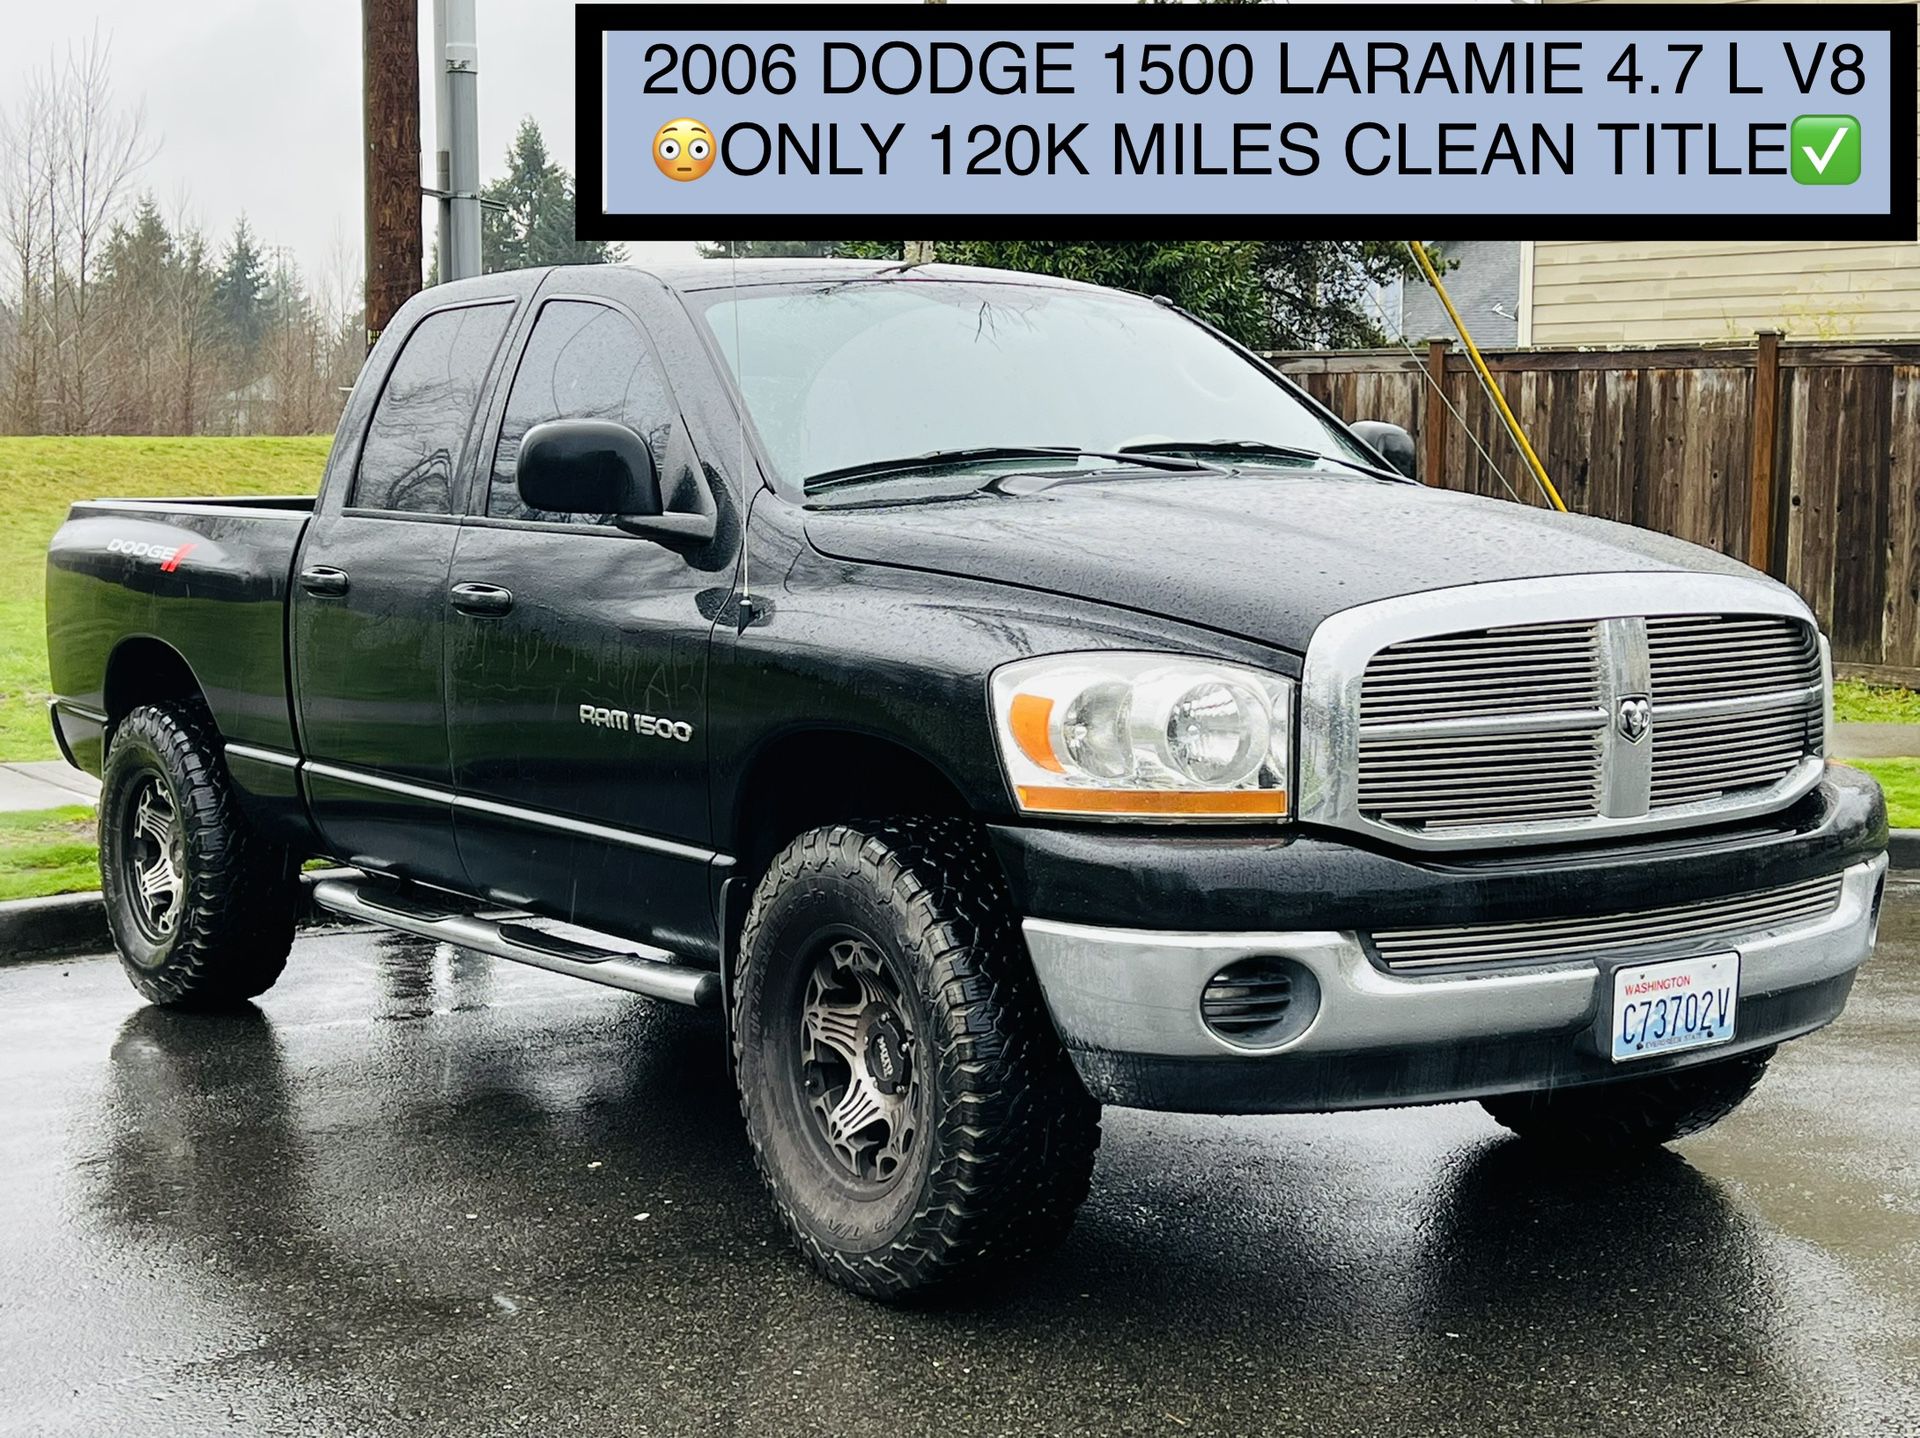 2006 DODGE RAM 1500 4.7L V8 ENGINE❗️4X4❕ONLY 120K TOTAL MILES💡UPGRADED TIRES AND WHEELS/RUNNINGBOARDS